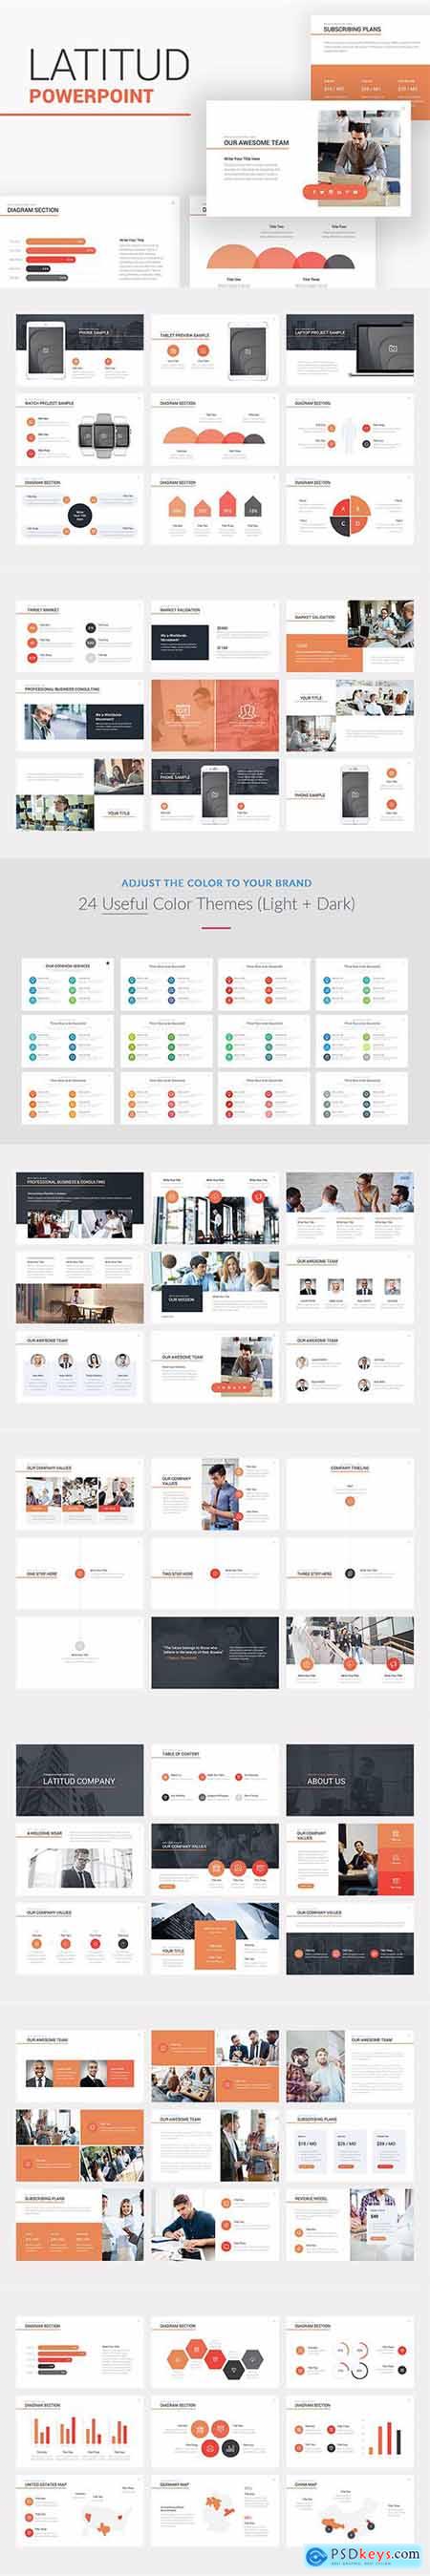 Latitud Business Pitch Deck Powerpoint, Keynote and Google Slides Template